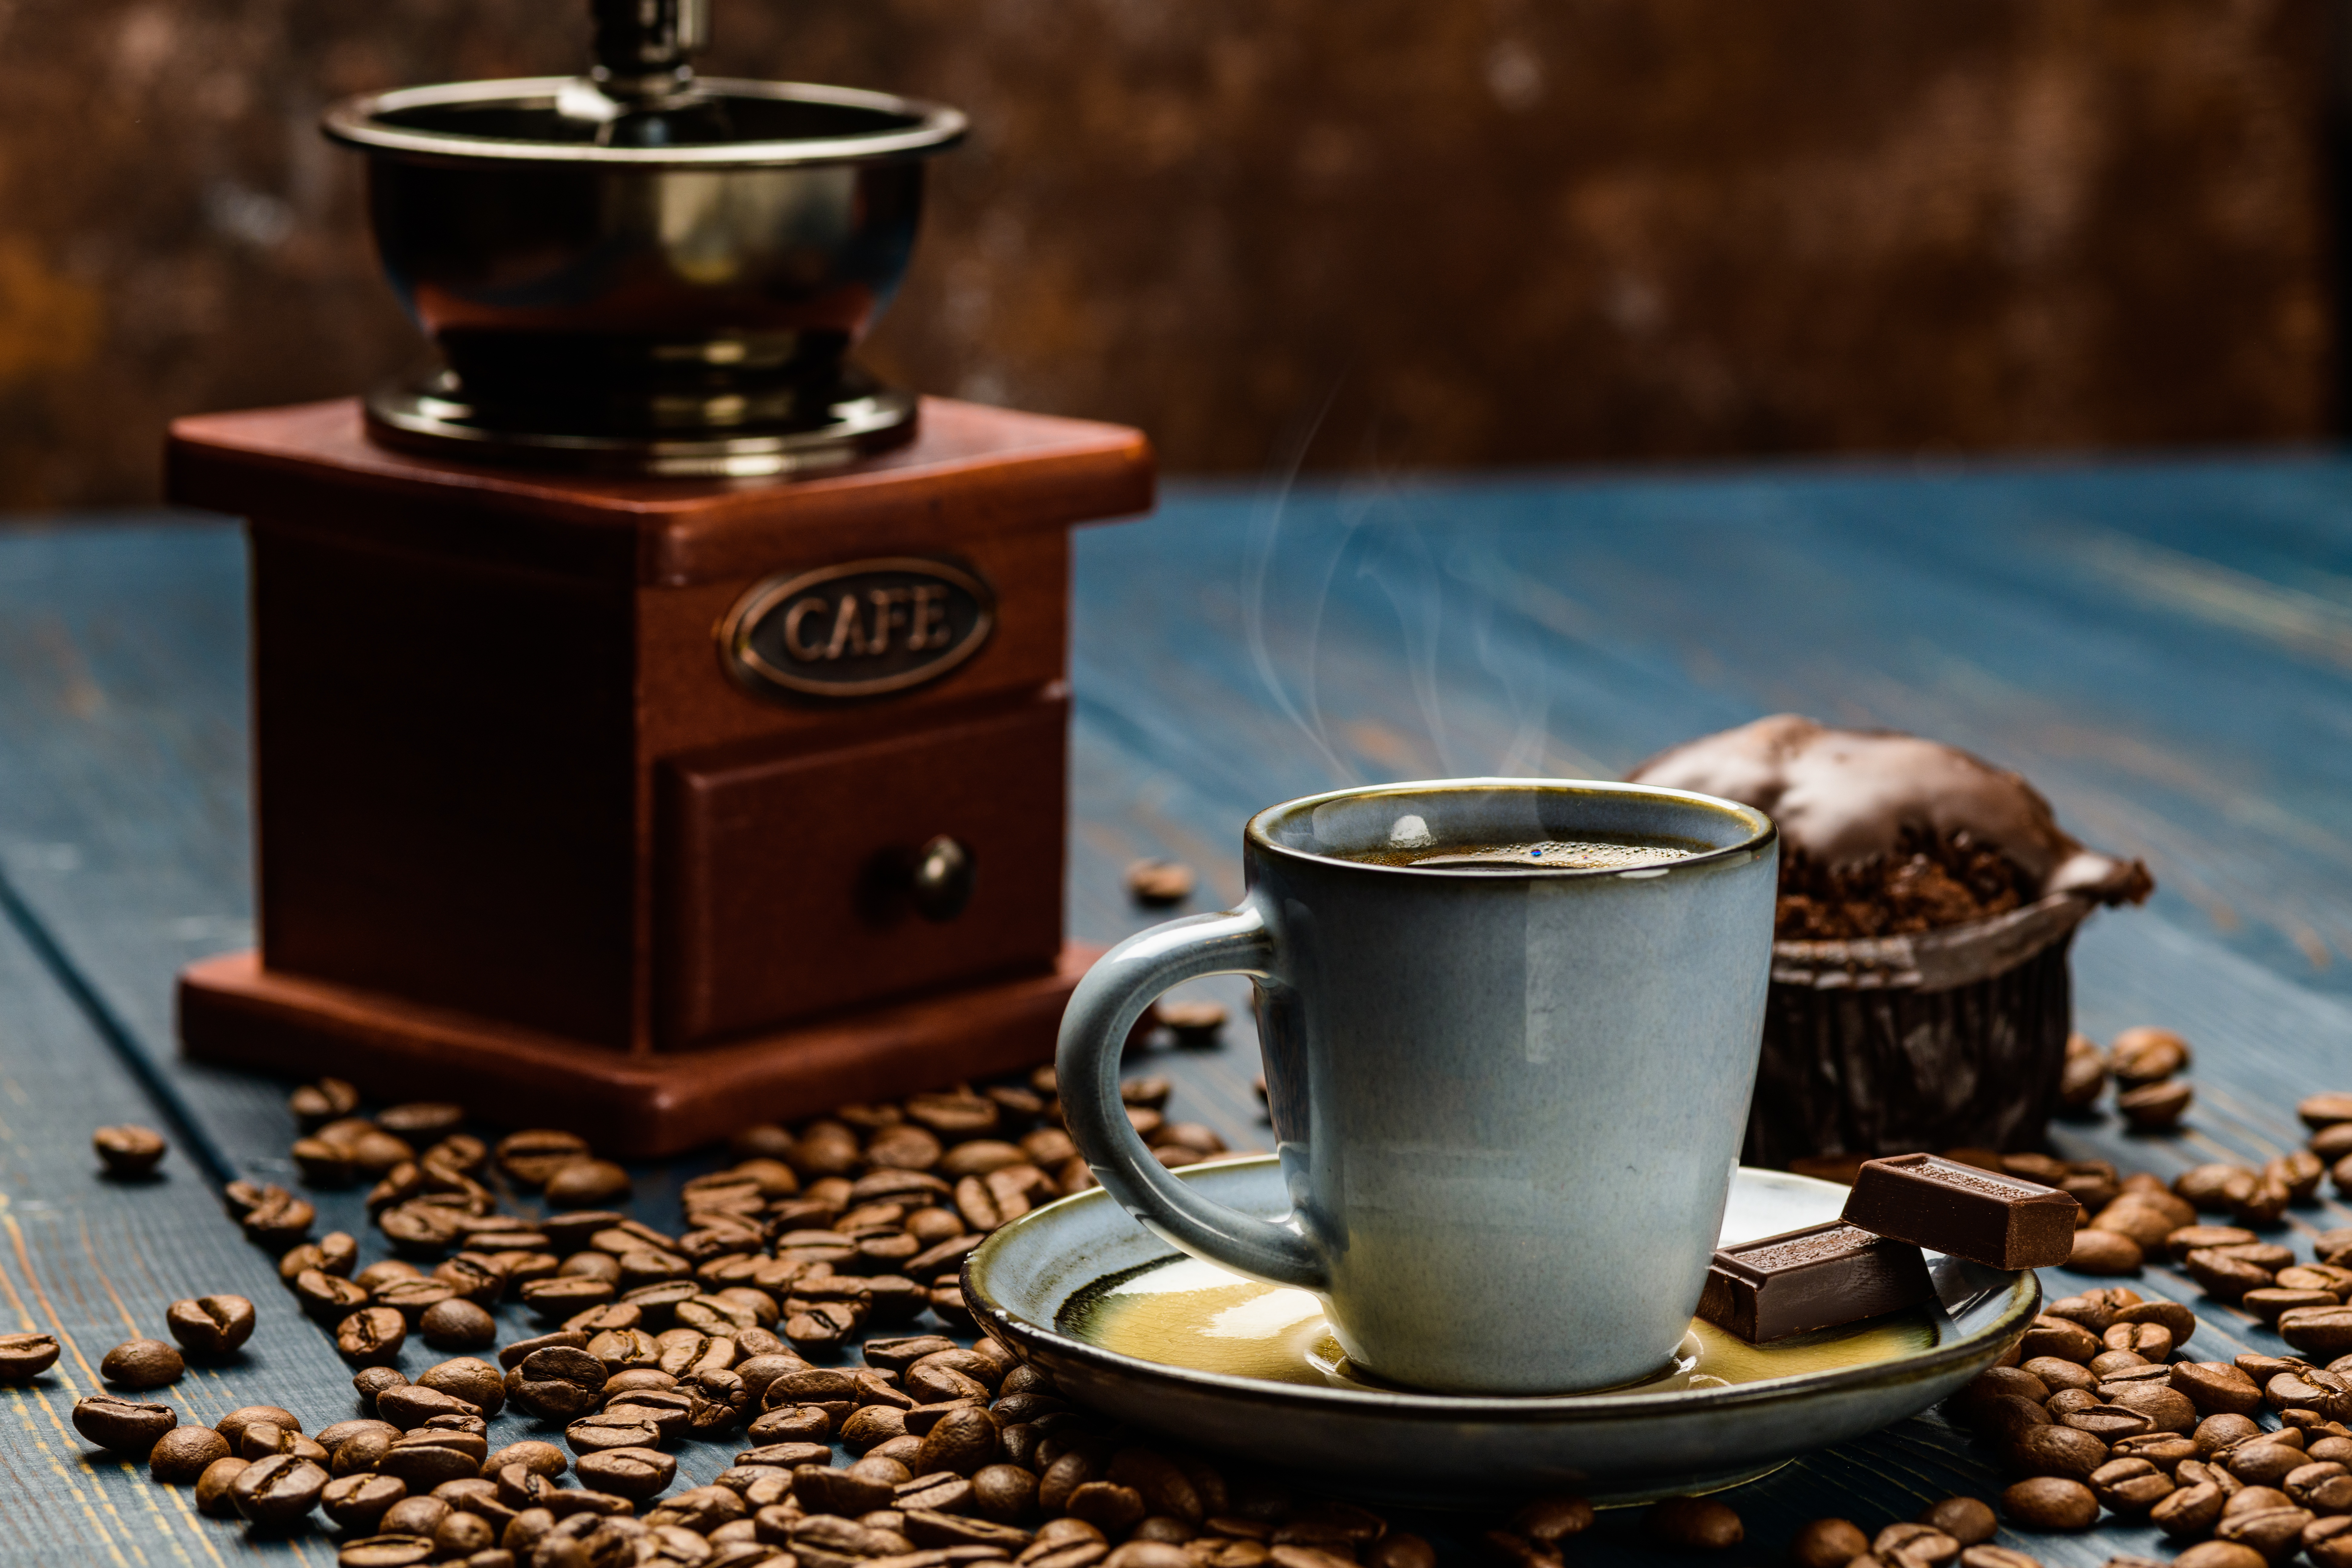 Chocolate Coffee Beans Cup Drink Grinder Still Life 7770x5180